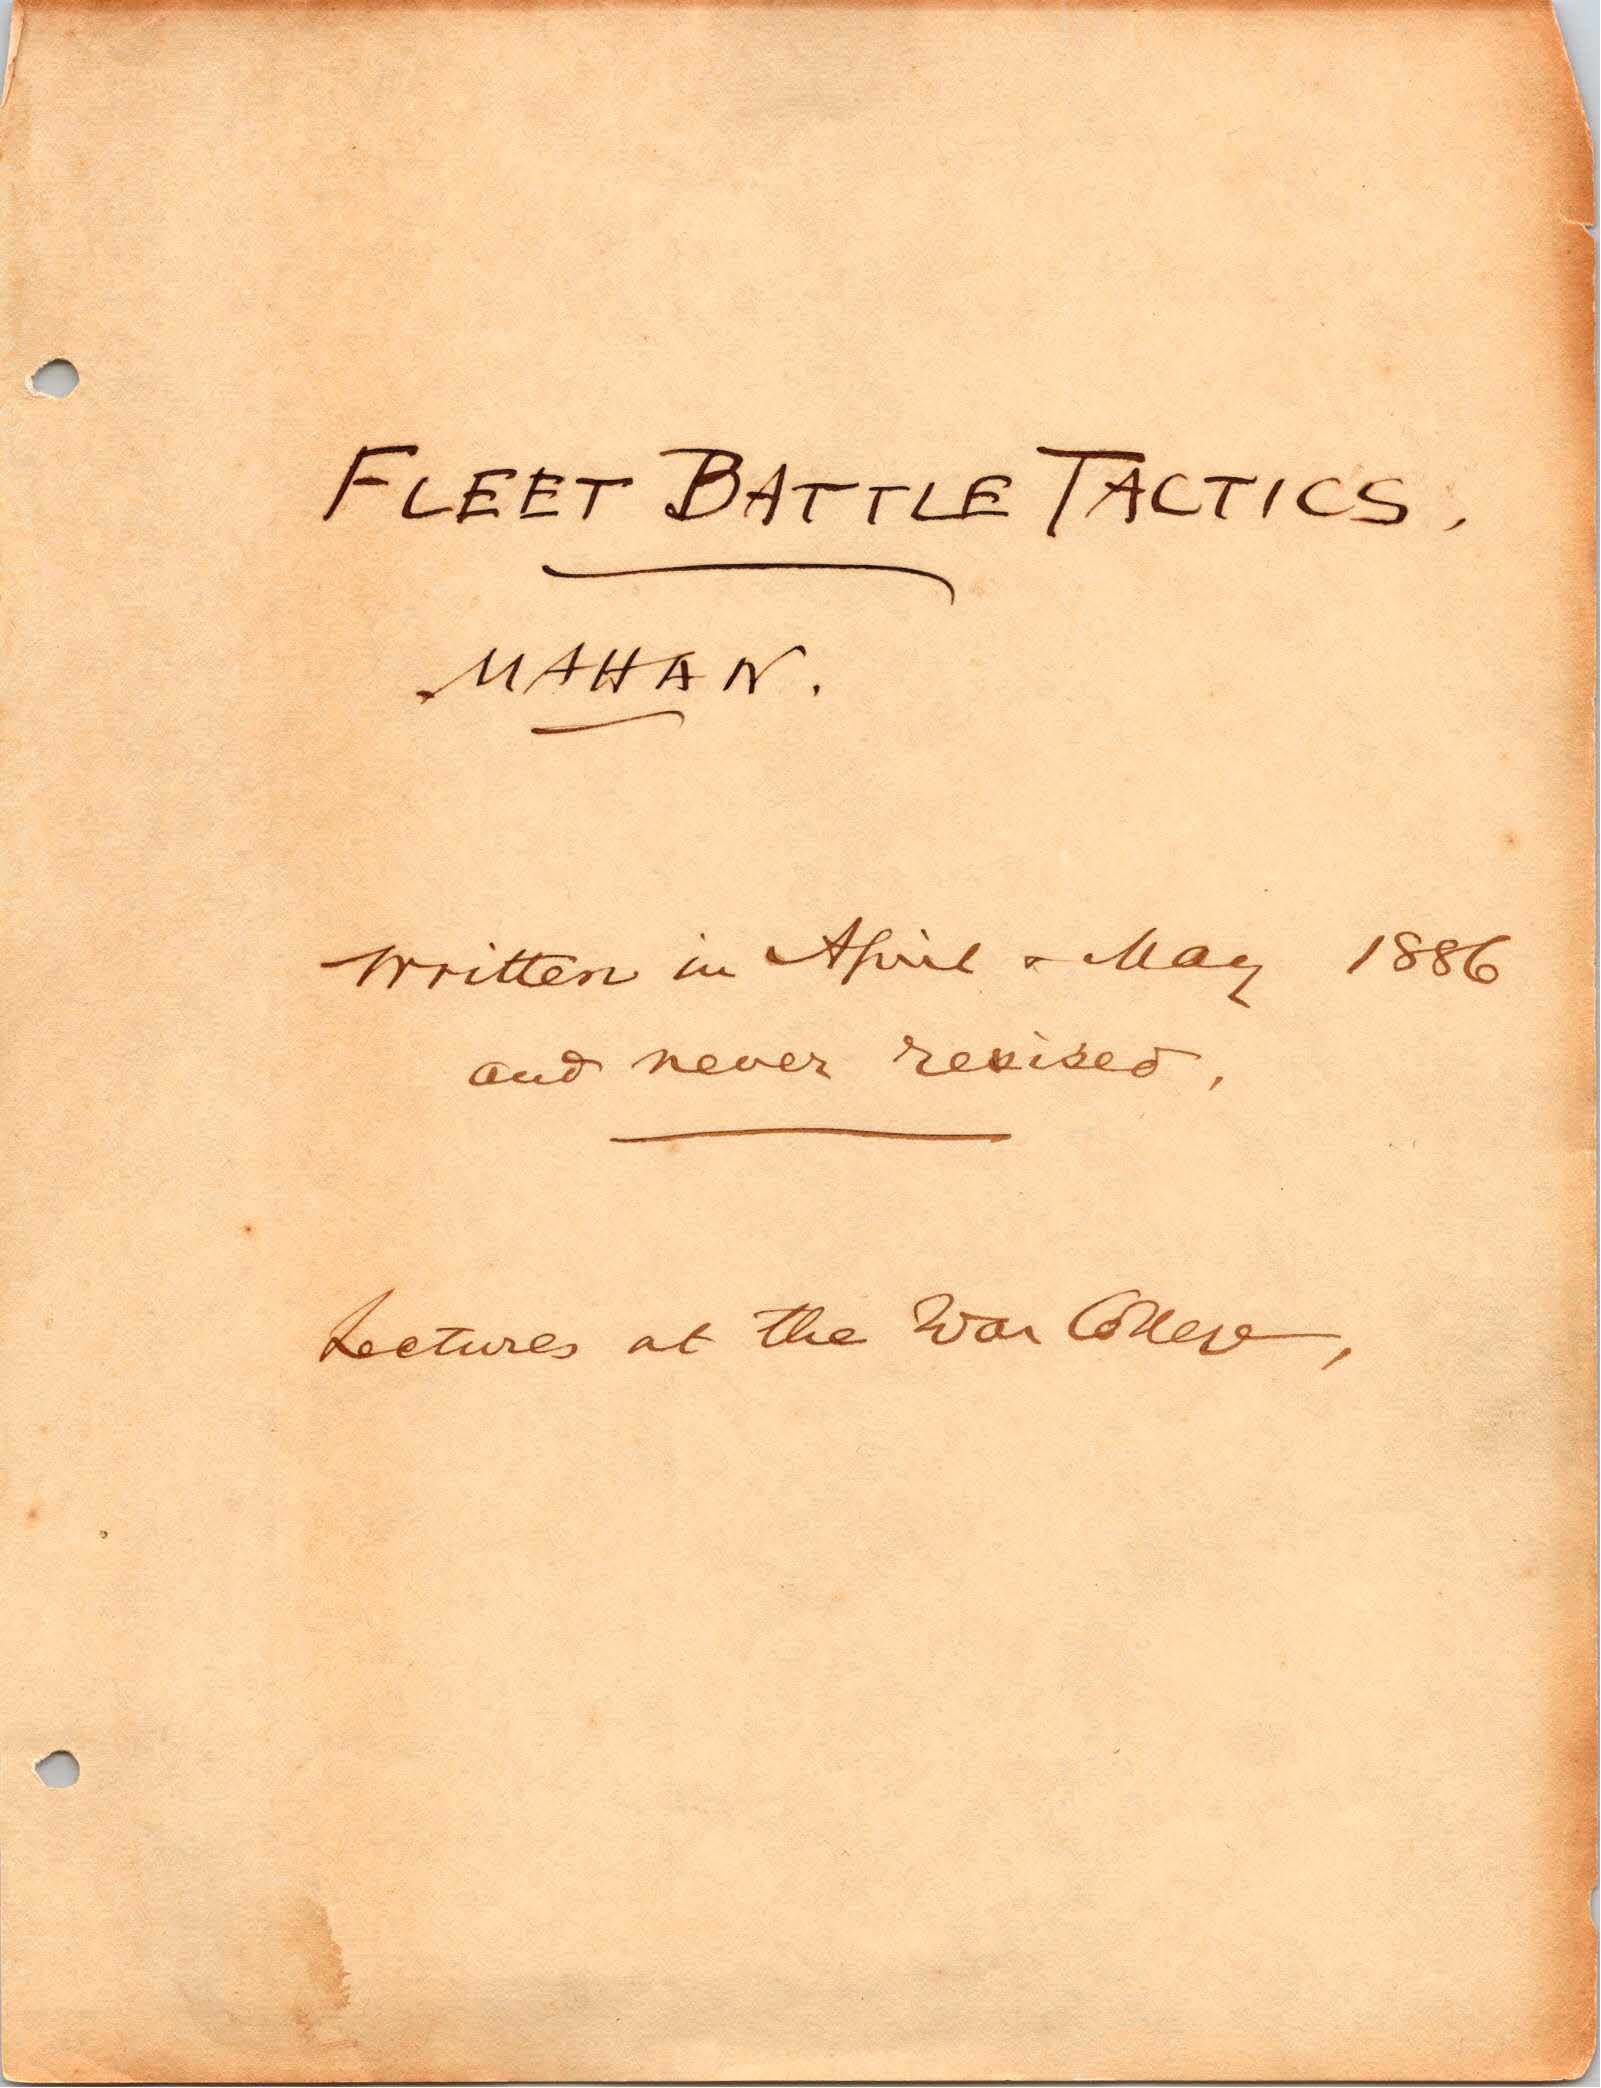 Lectures on Fleet Battle Tactics, by Alfred T. Mahan